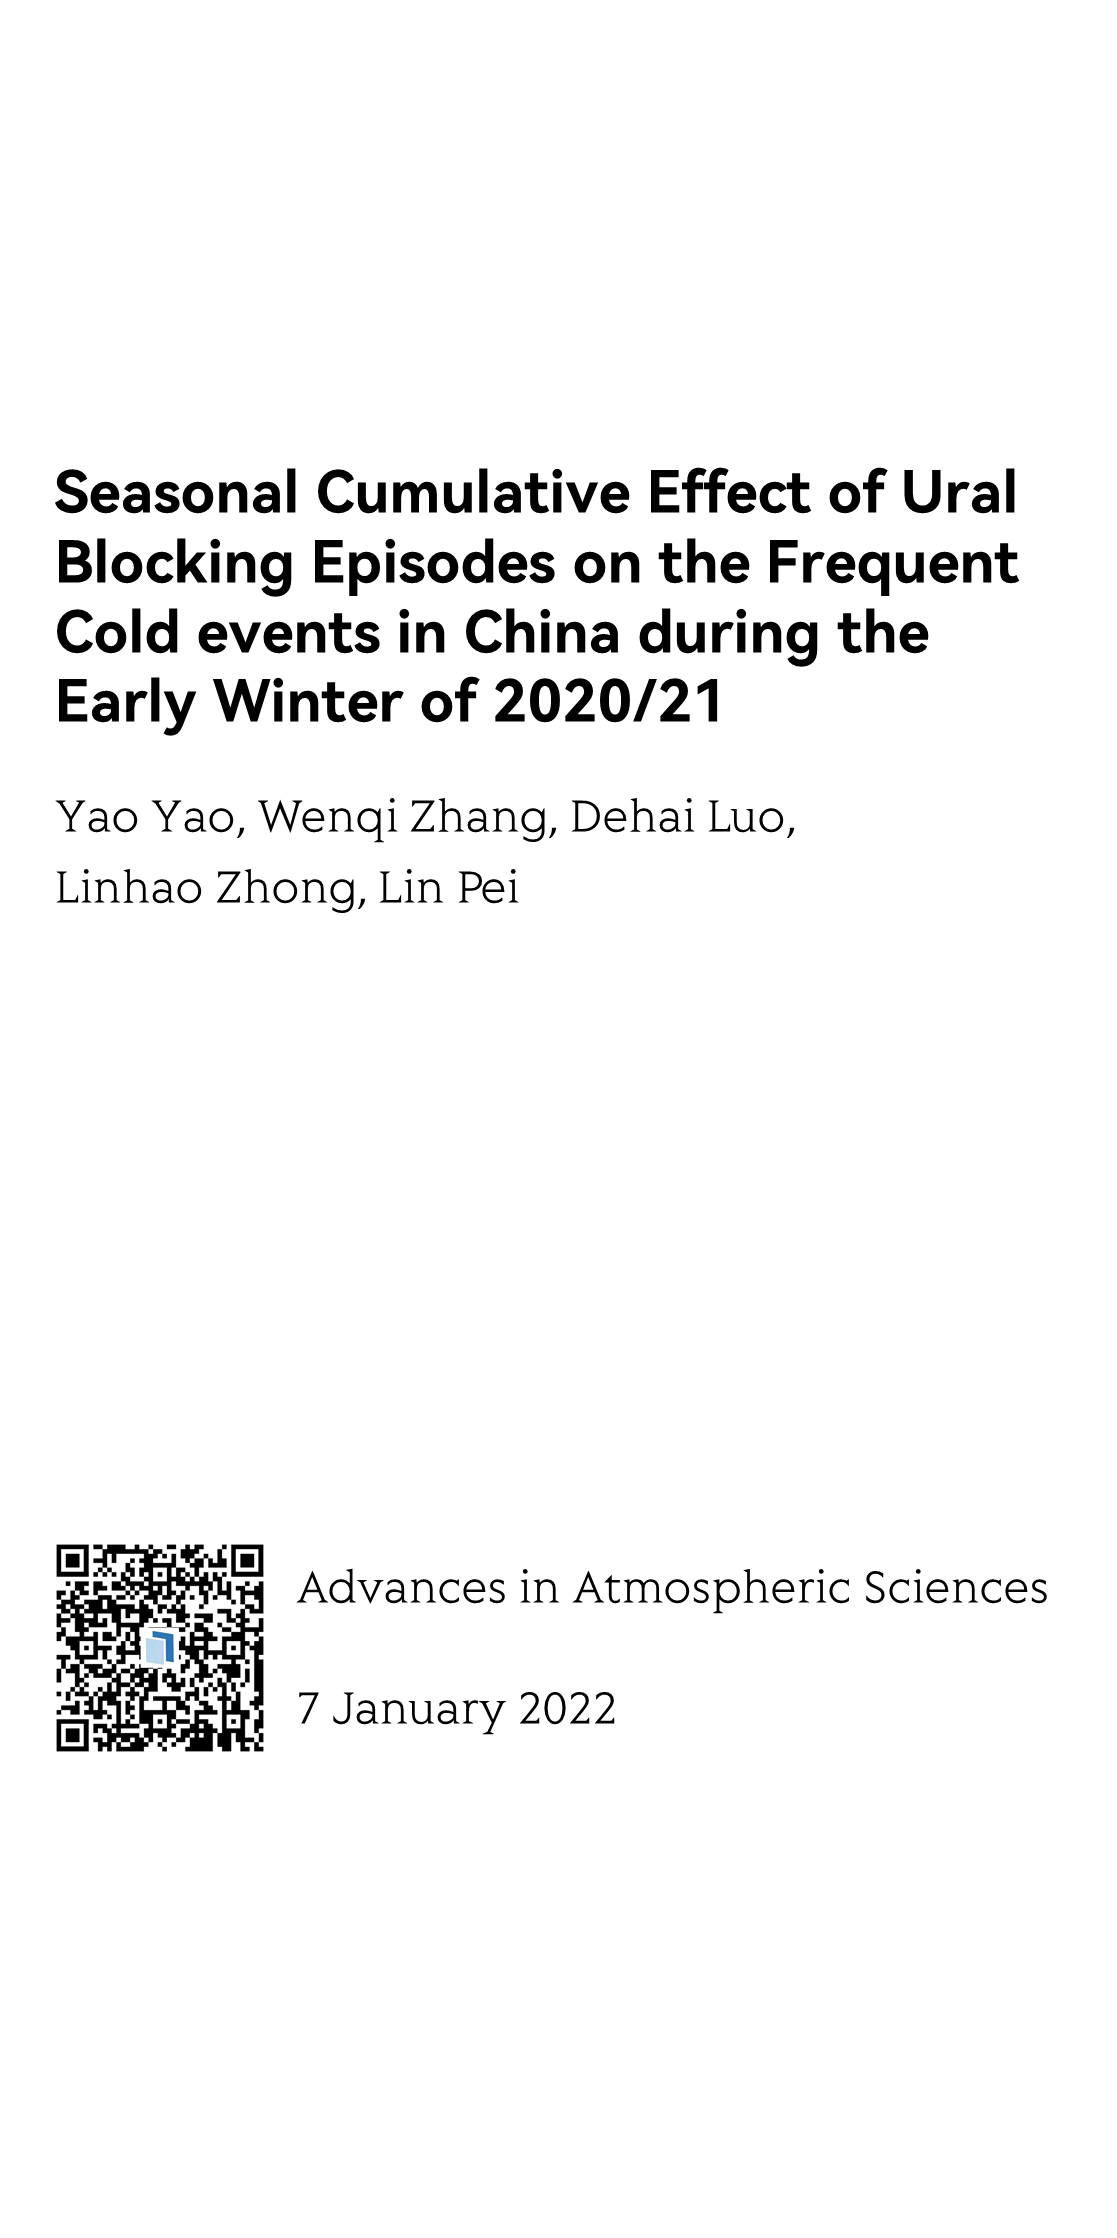 Seasonal Cumulative Effect of Ural Blocking Episodes on the Frequent Cold events in China during the Early Winter of 2020/21_1